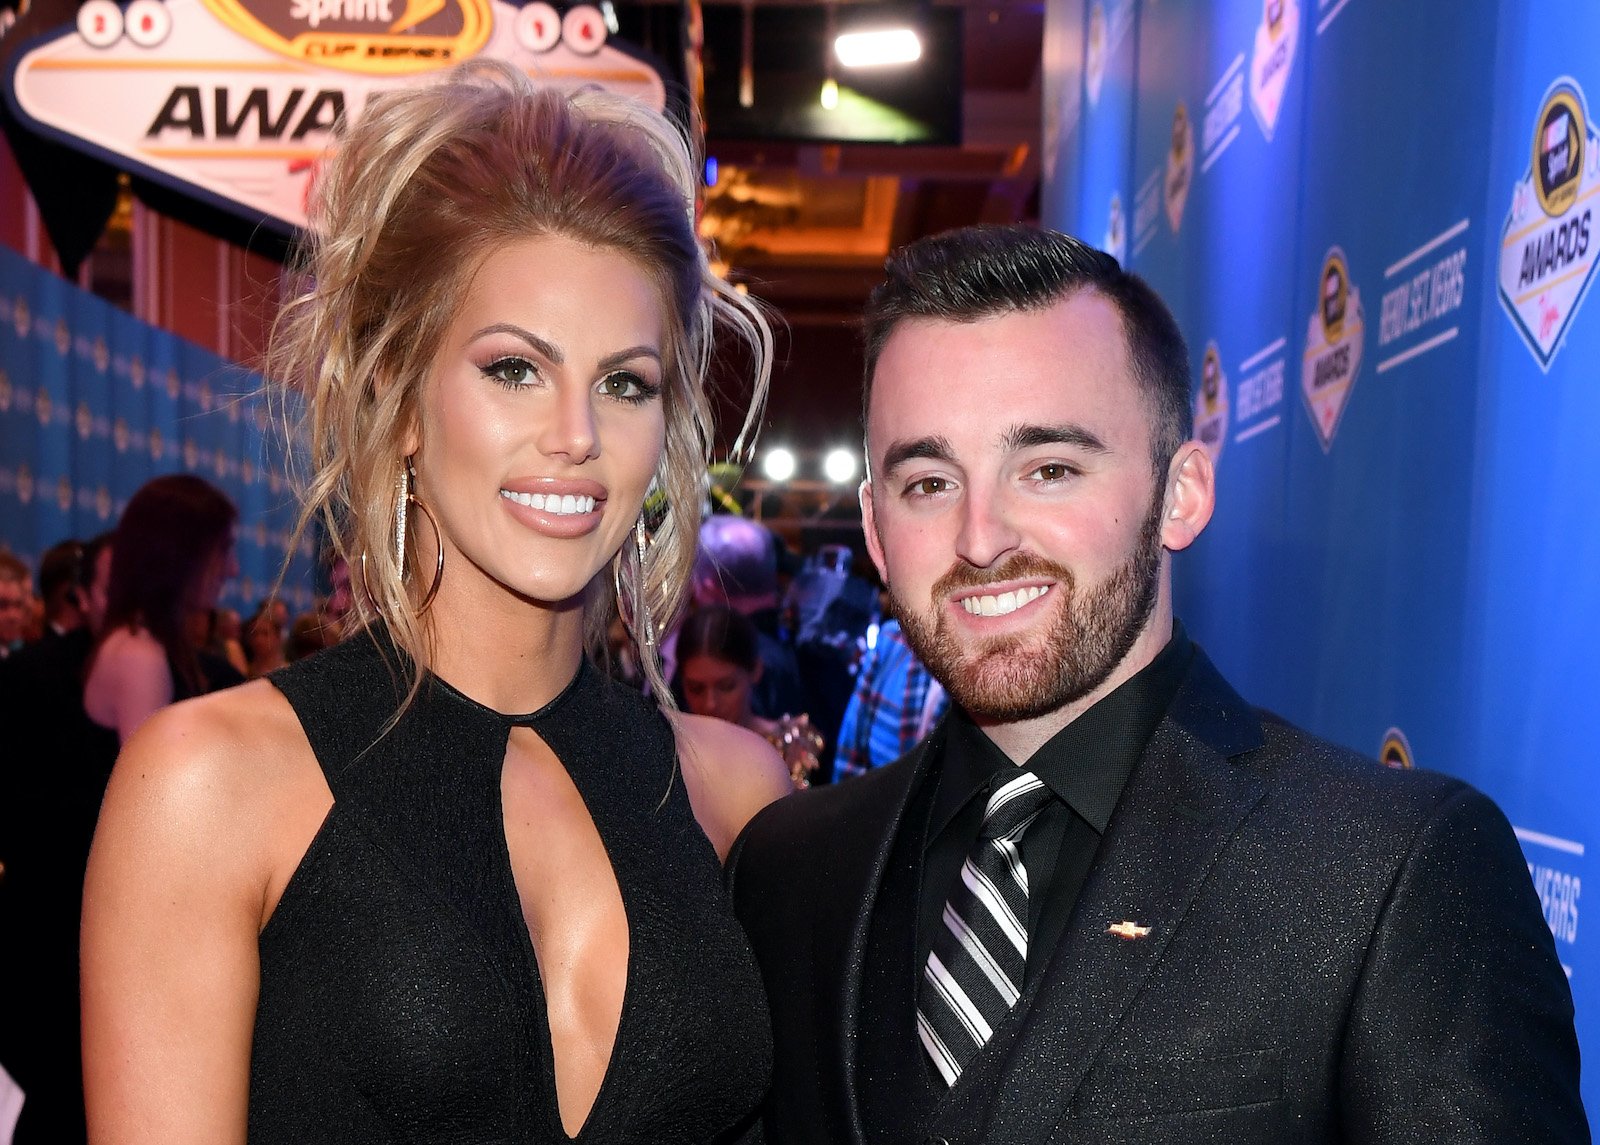 Whitney Dillon and husband Austin Dillon pose for a photo during a NASCAR red carpet event 